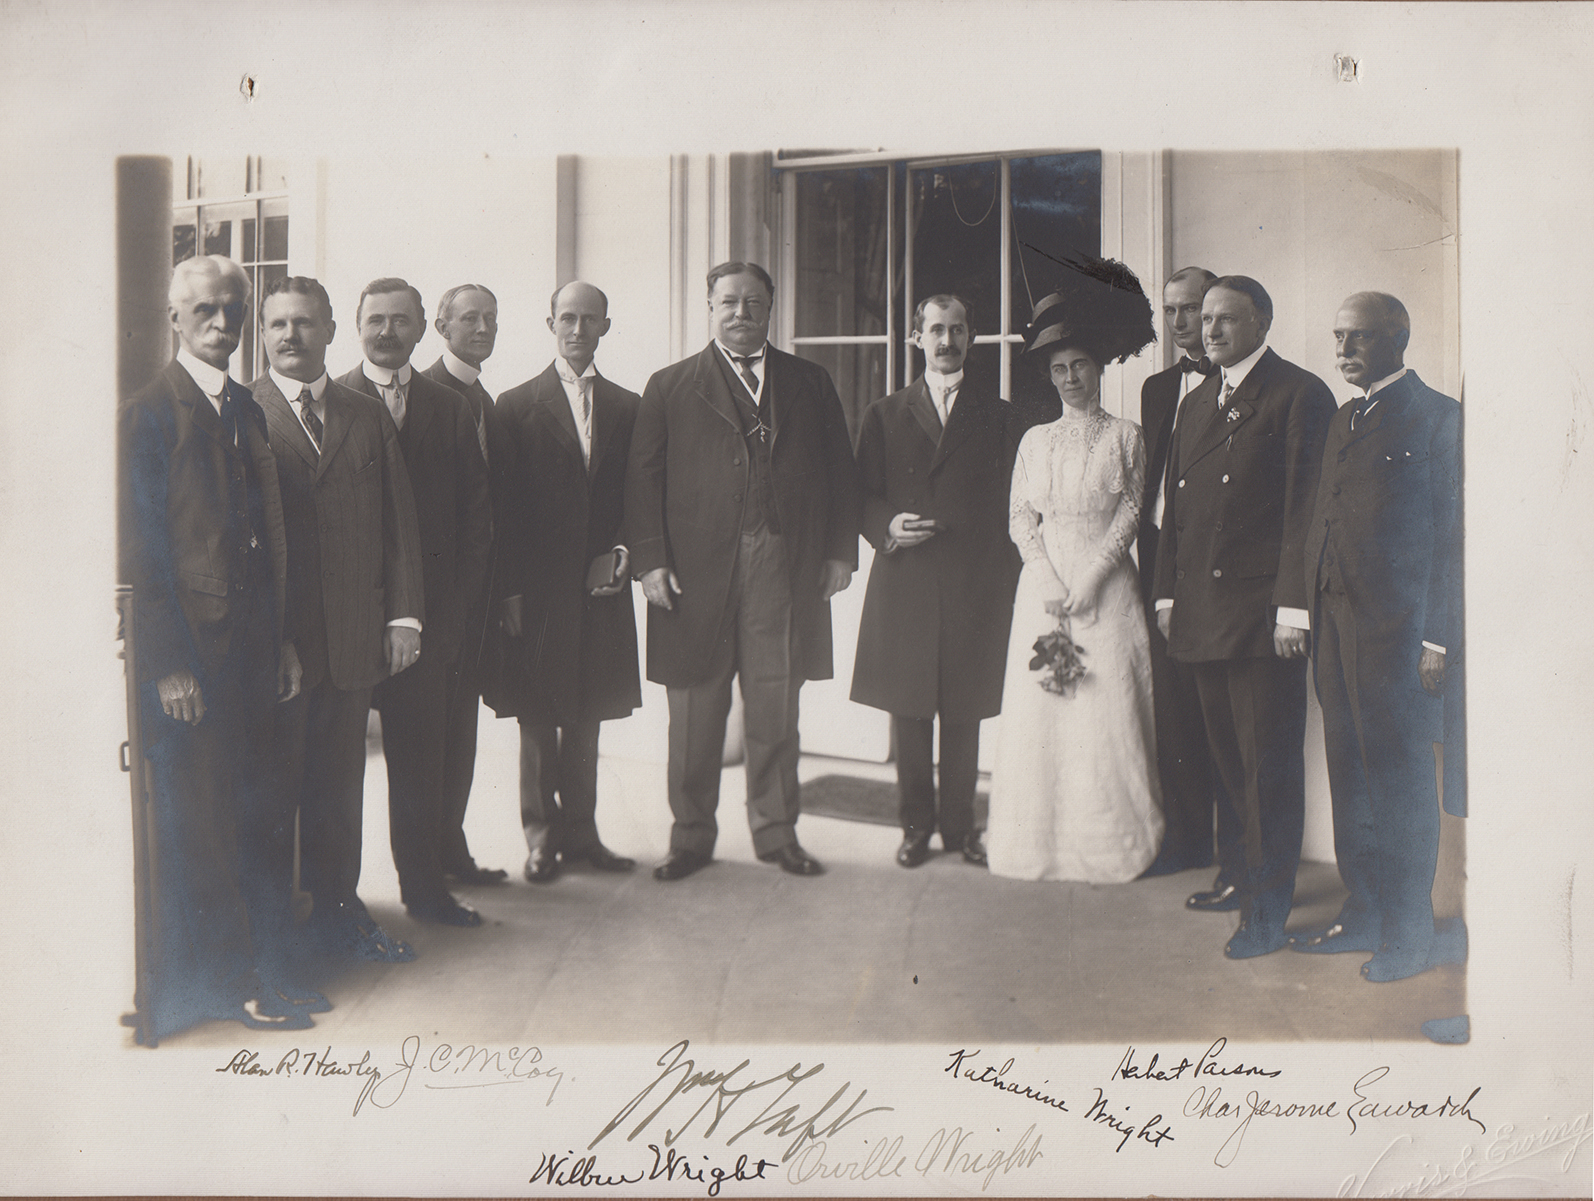 President Taft, center, with Wilbur Wright (left) and Orville Wright and sister Katharine (right) and other important gentlemen, at the White House, June 10, 1909. From the Aero Club of America scrapbook, MS-1 Wright Brothers Collection.